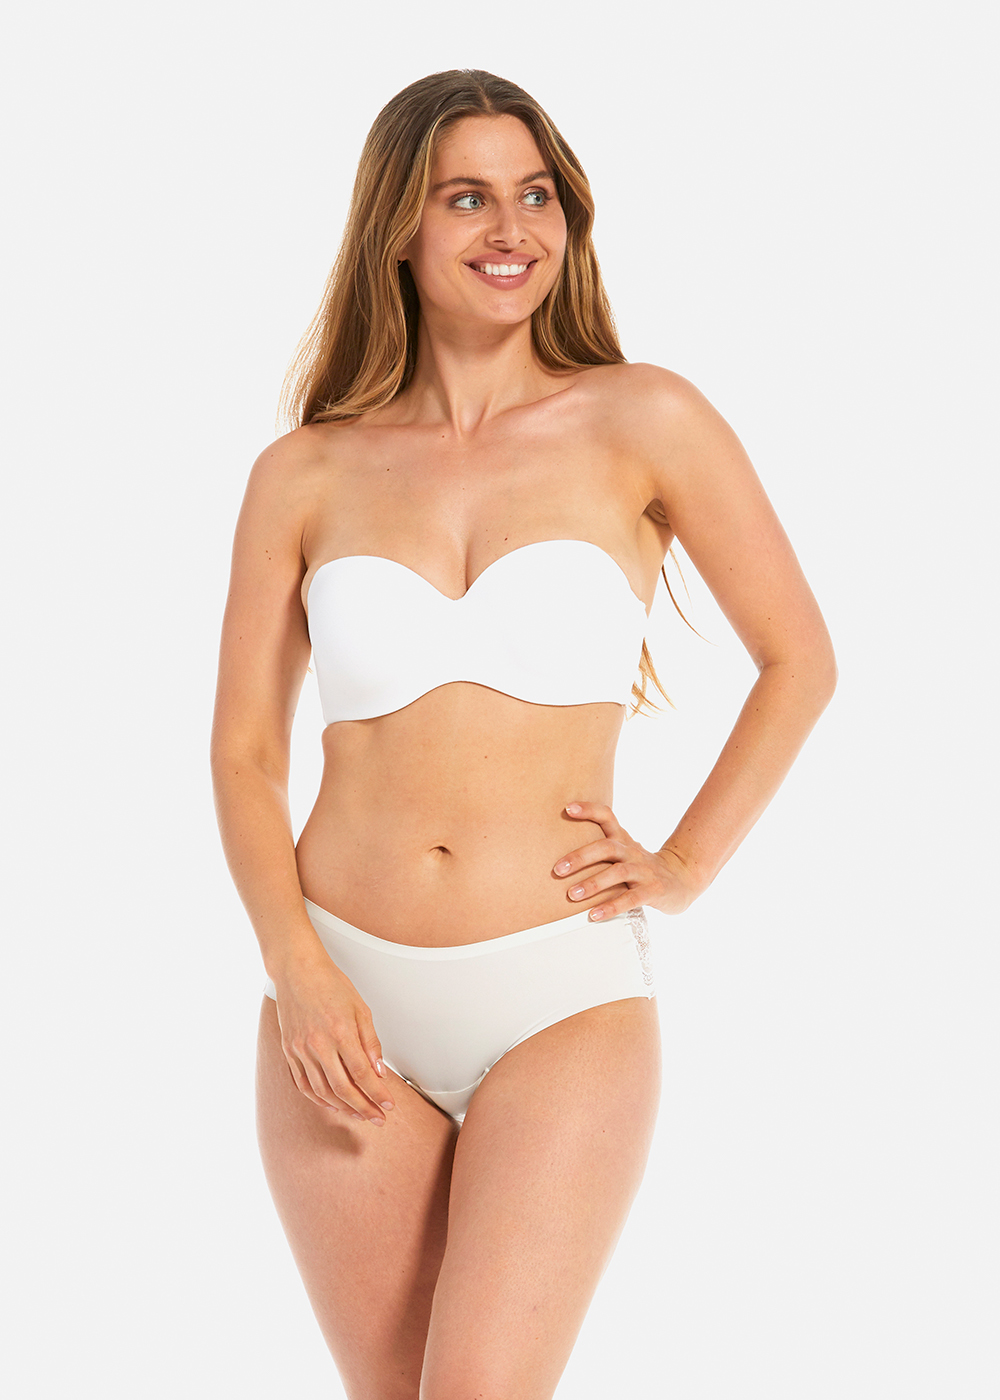 What Bra Should You Wear With A Halter Top? - Women's Blog on Bras